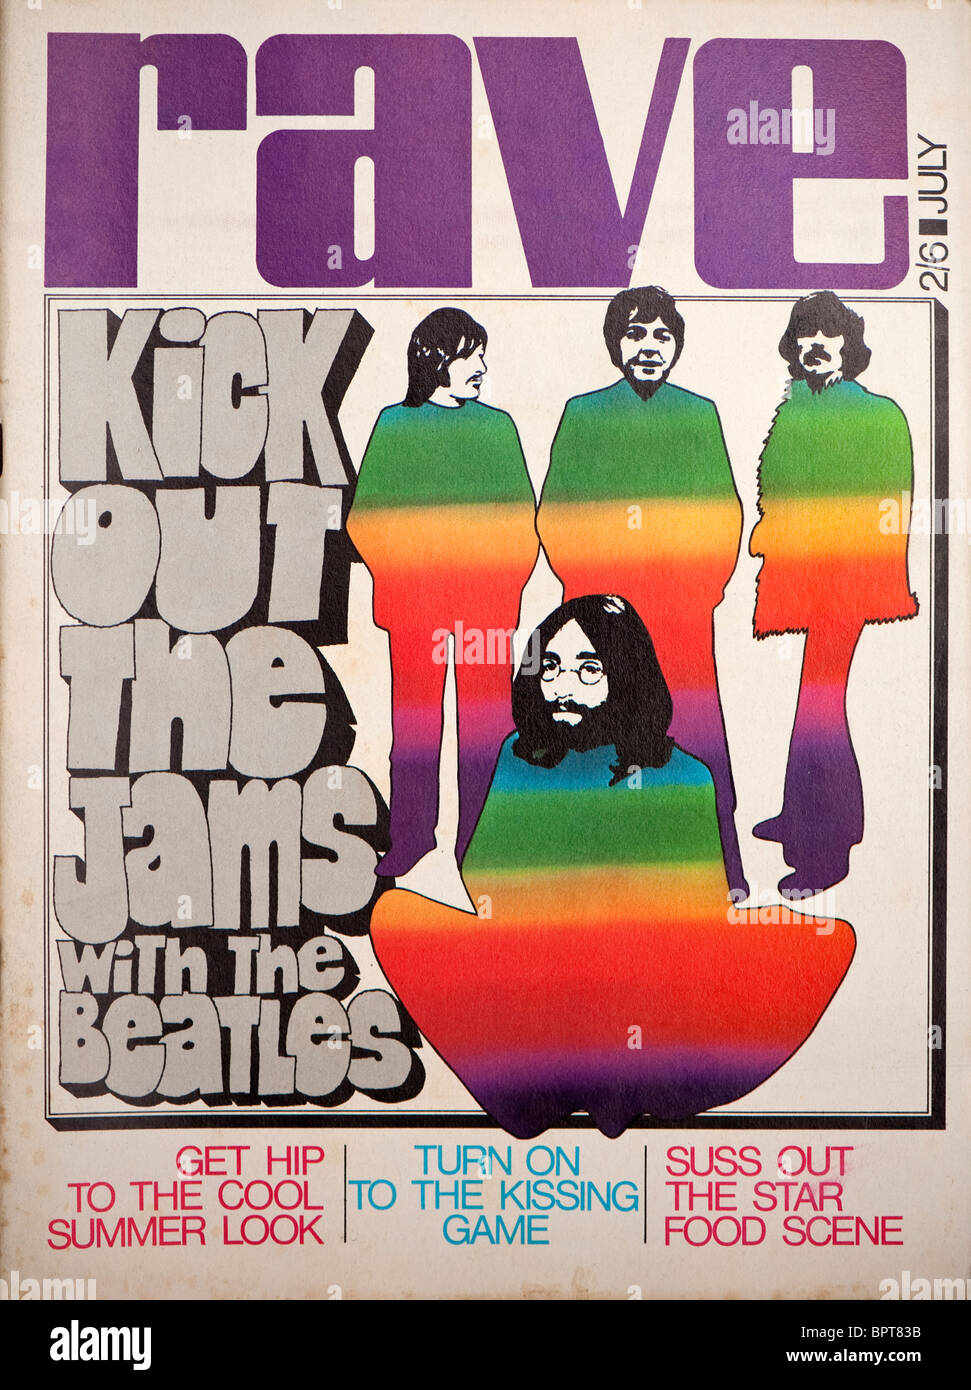 Cover of the Sixties magazine Rave showing The Beatles. Stock Photo